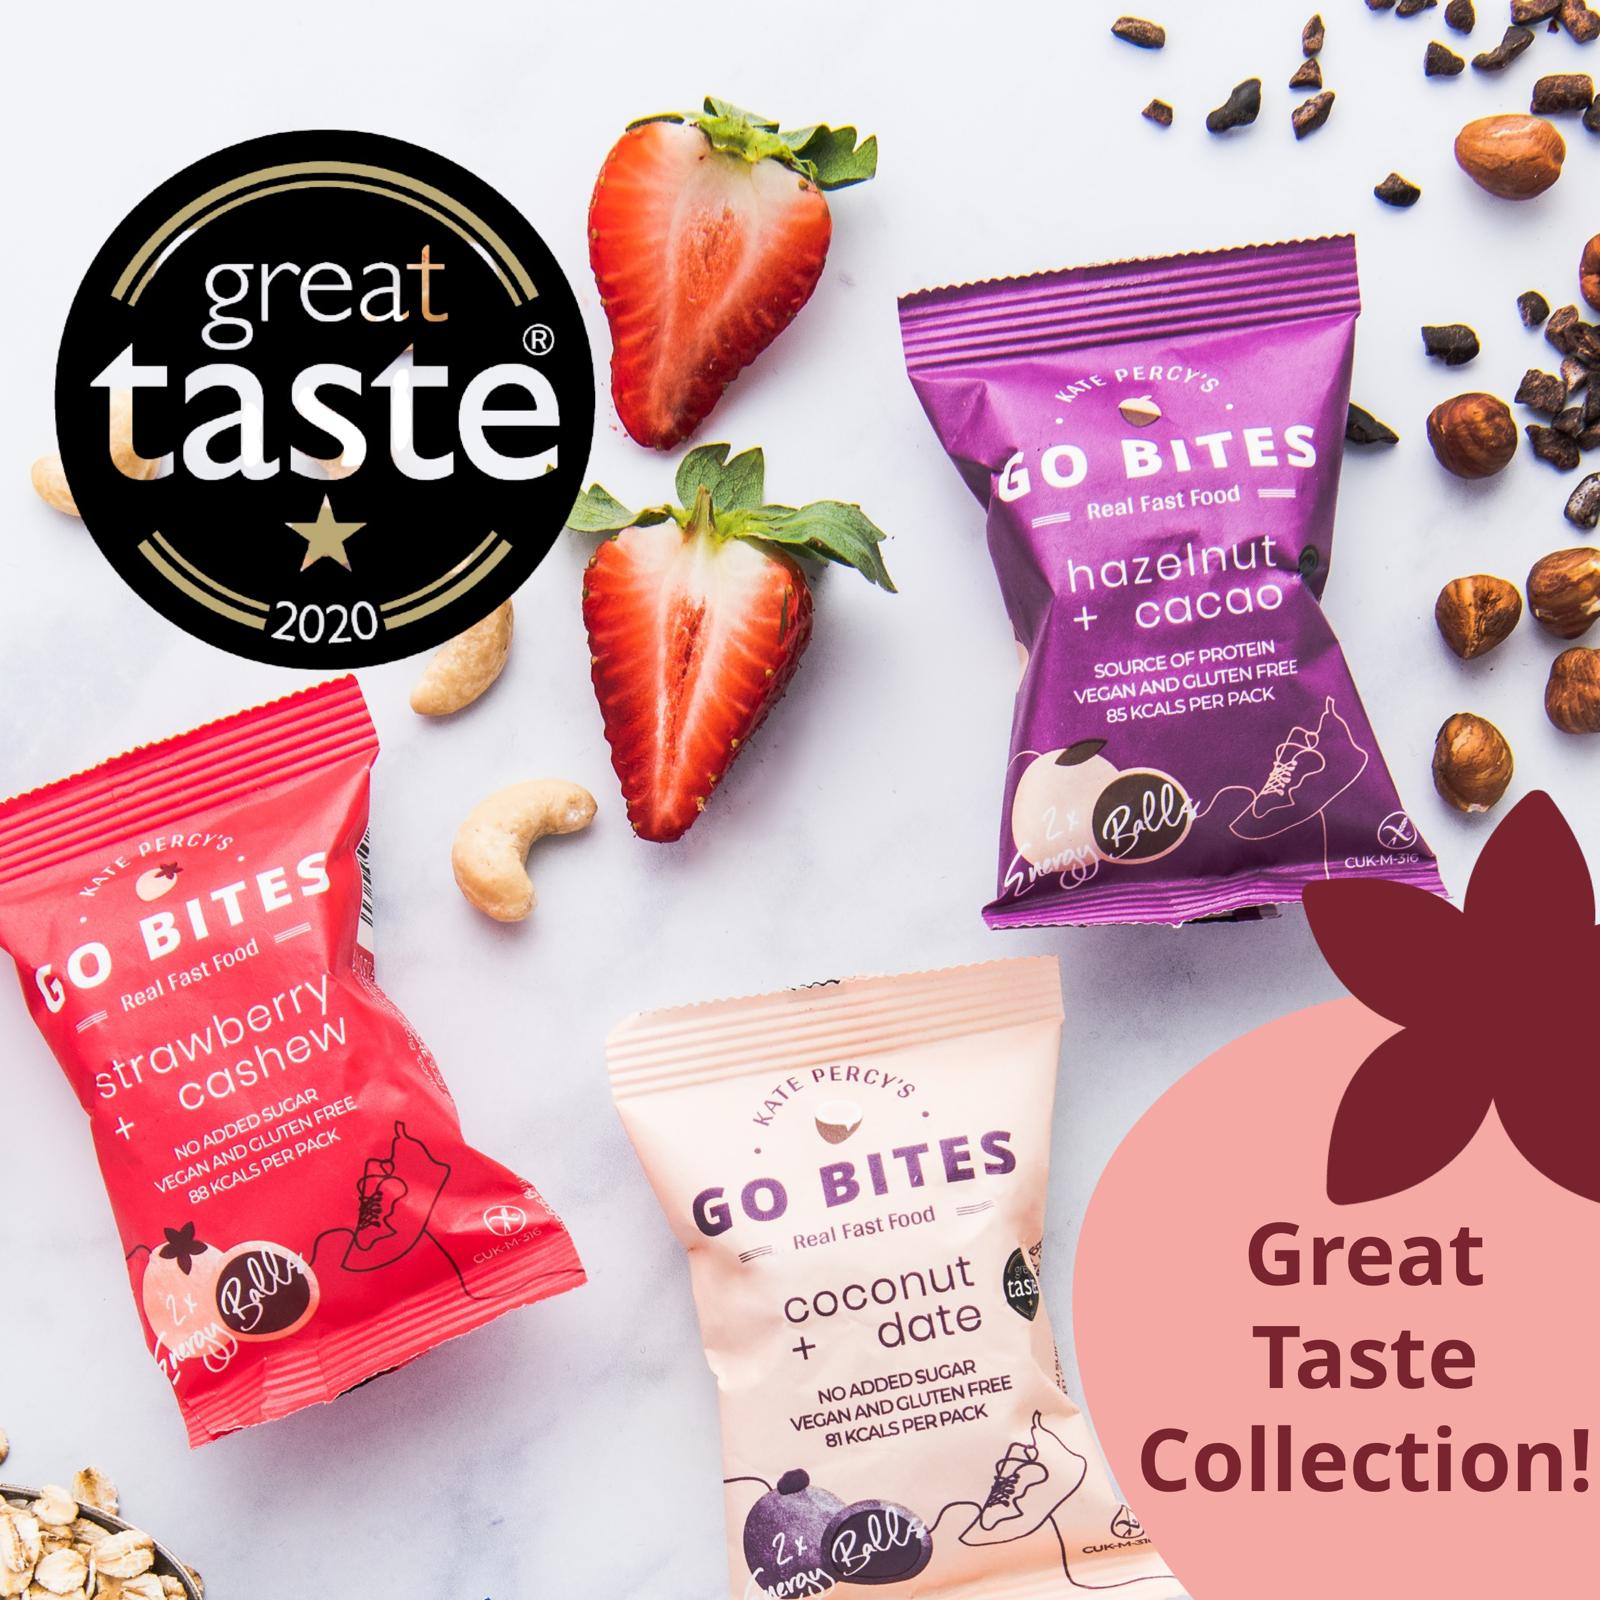 Great Taste collection - SAVE 14%!